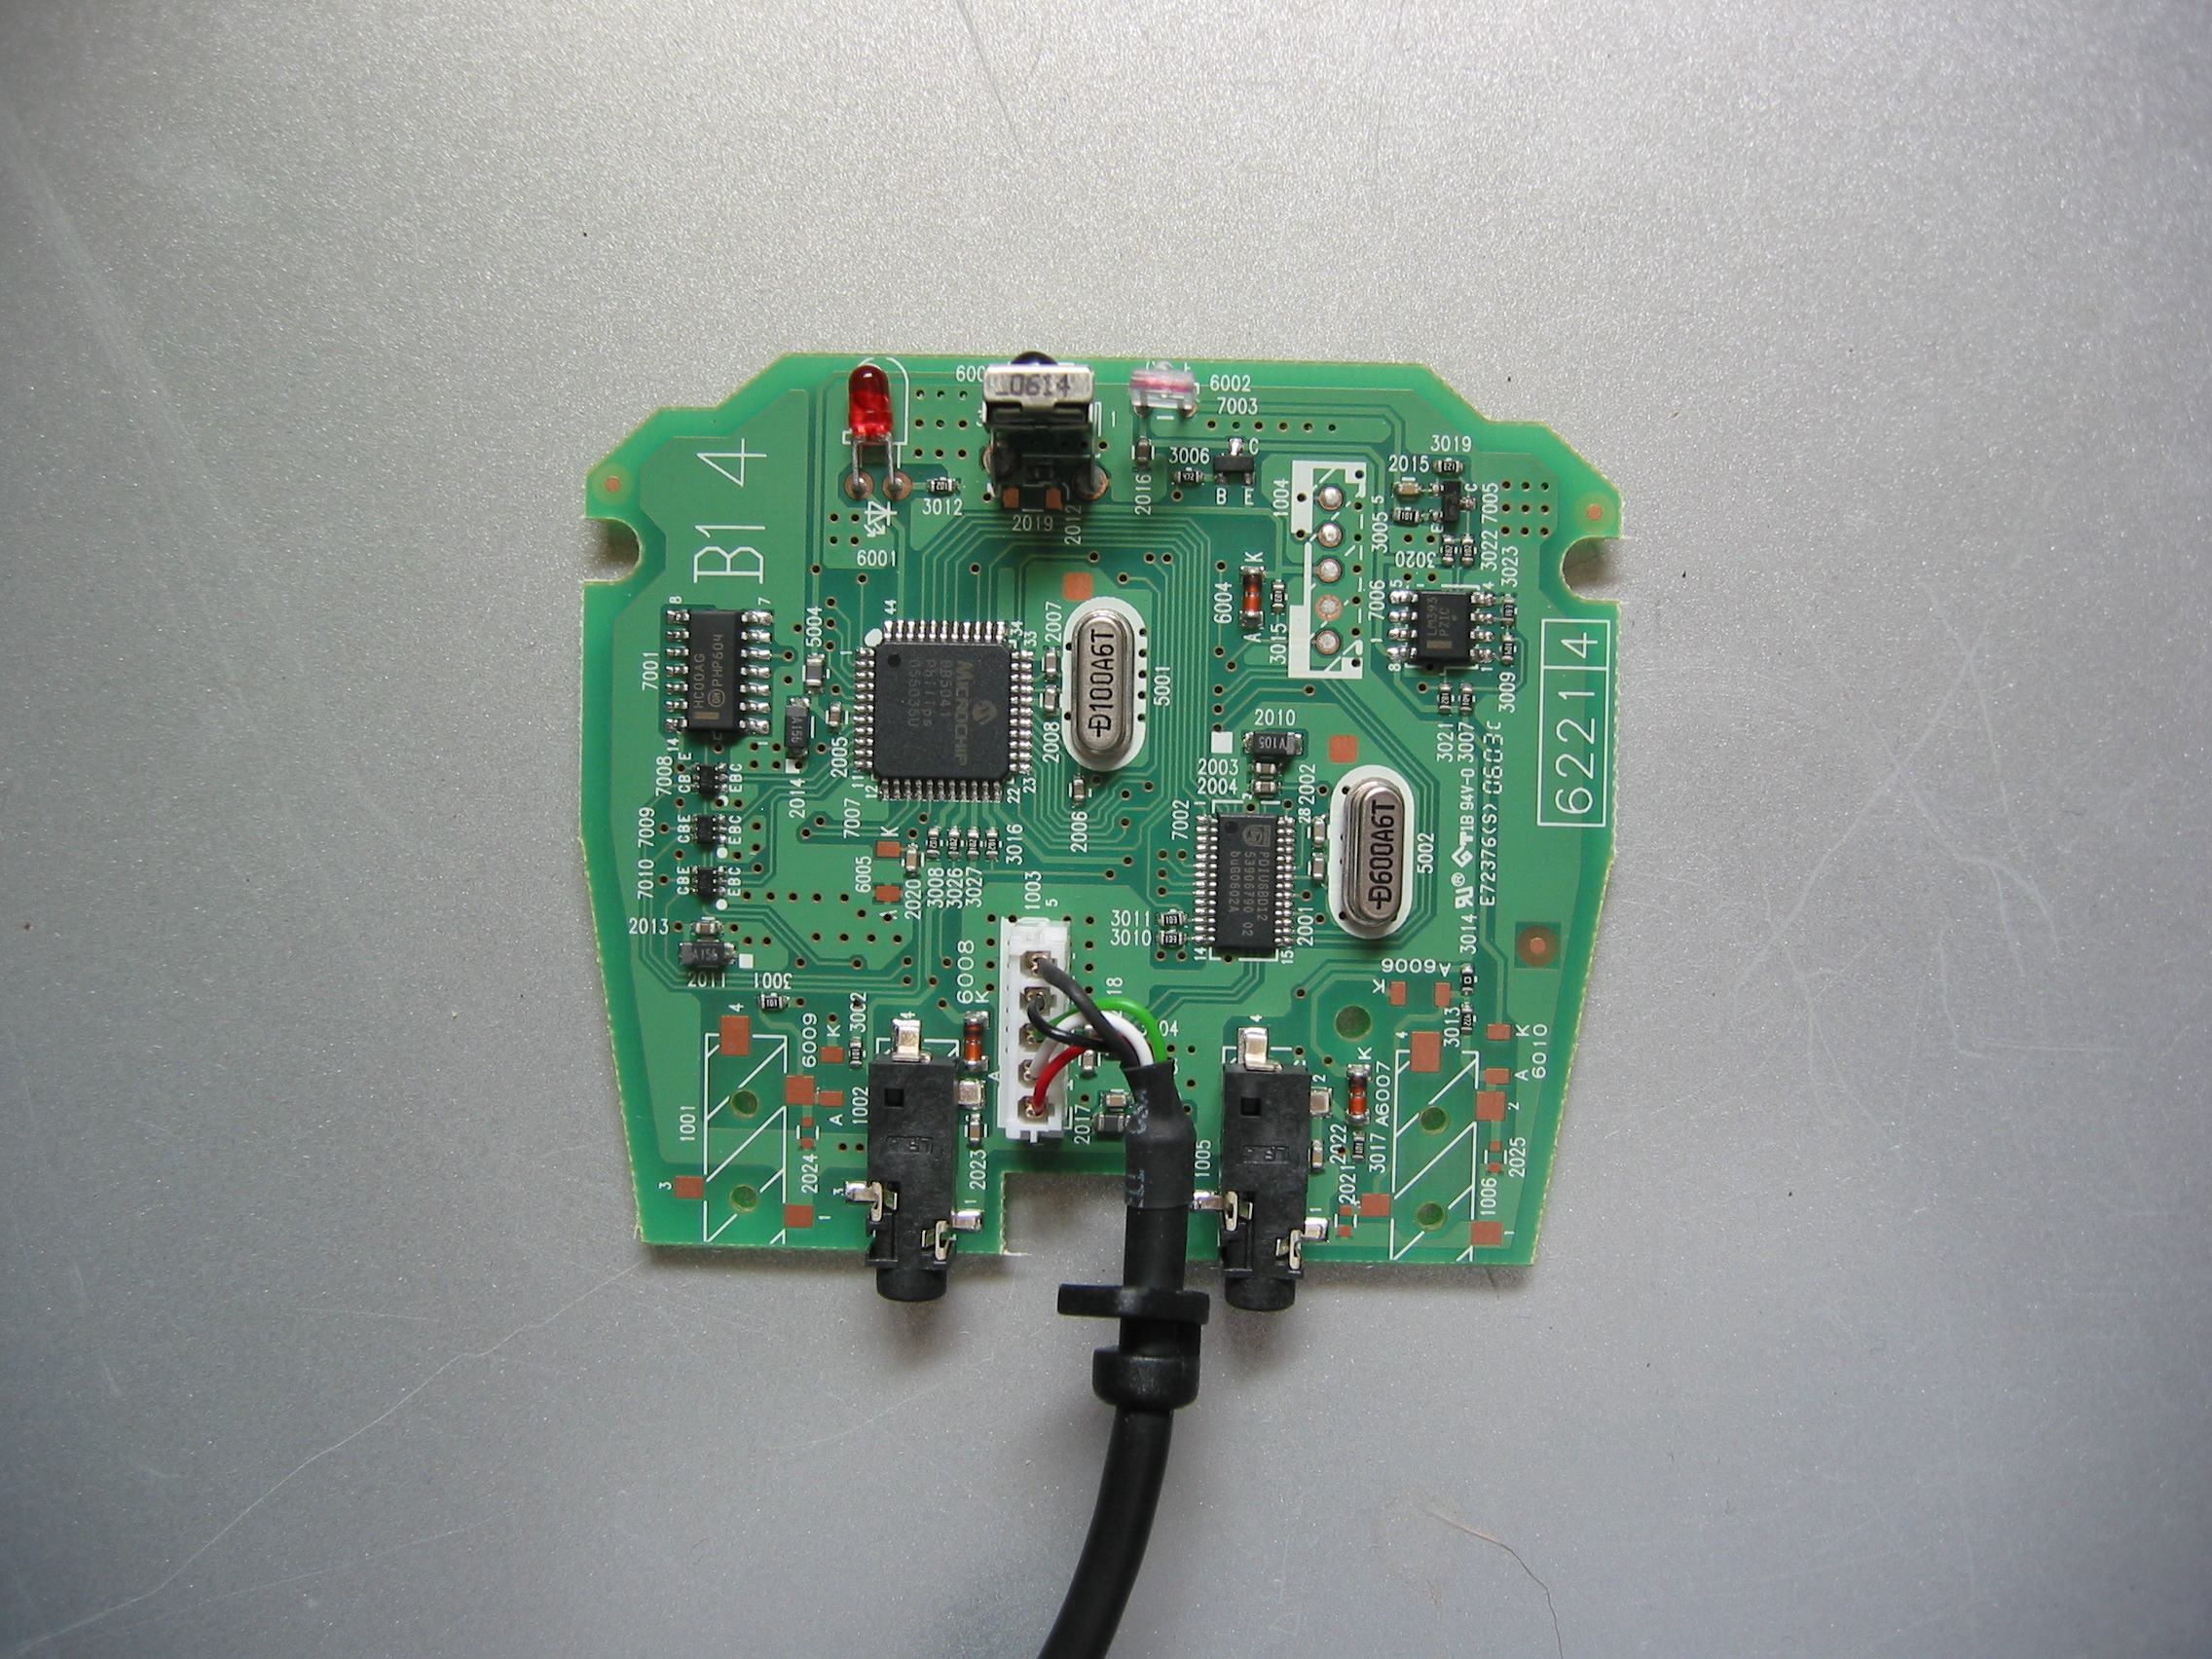 Microsoft Remote Control and Receiver 1.0A for media Center PC with Windows (model 1040) - PCB